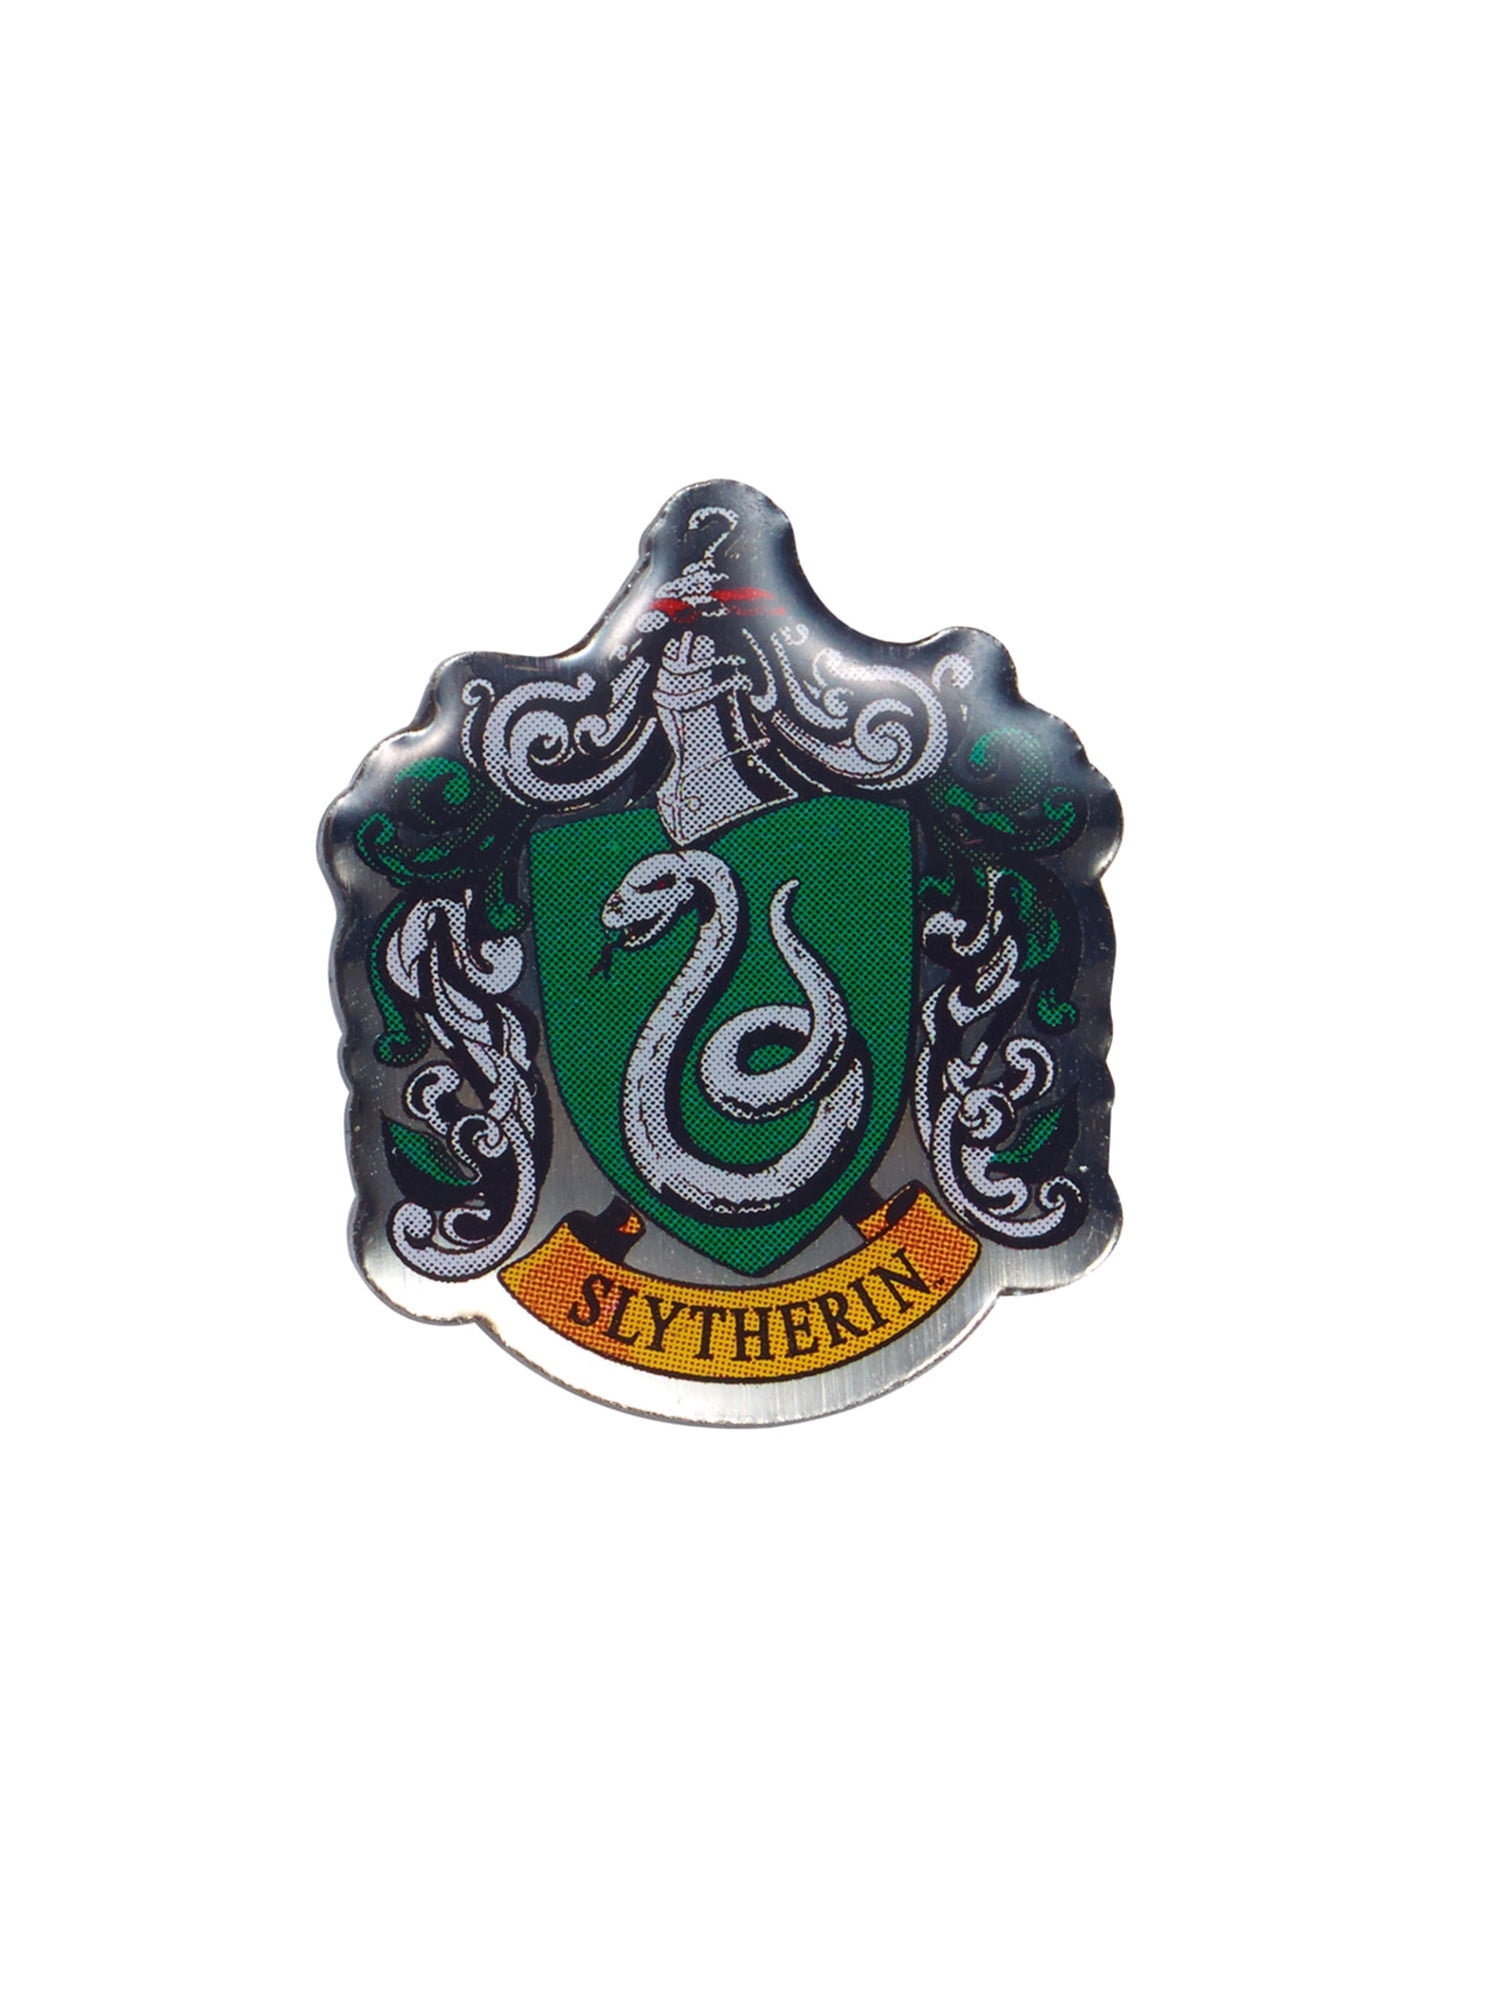 Harry Potter Slytherin House Shield Metal Pin Badge 